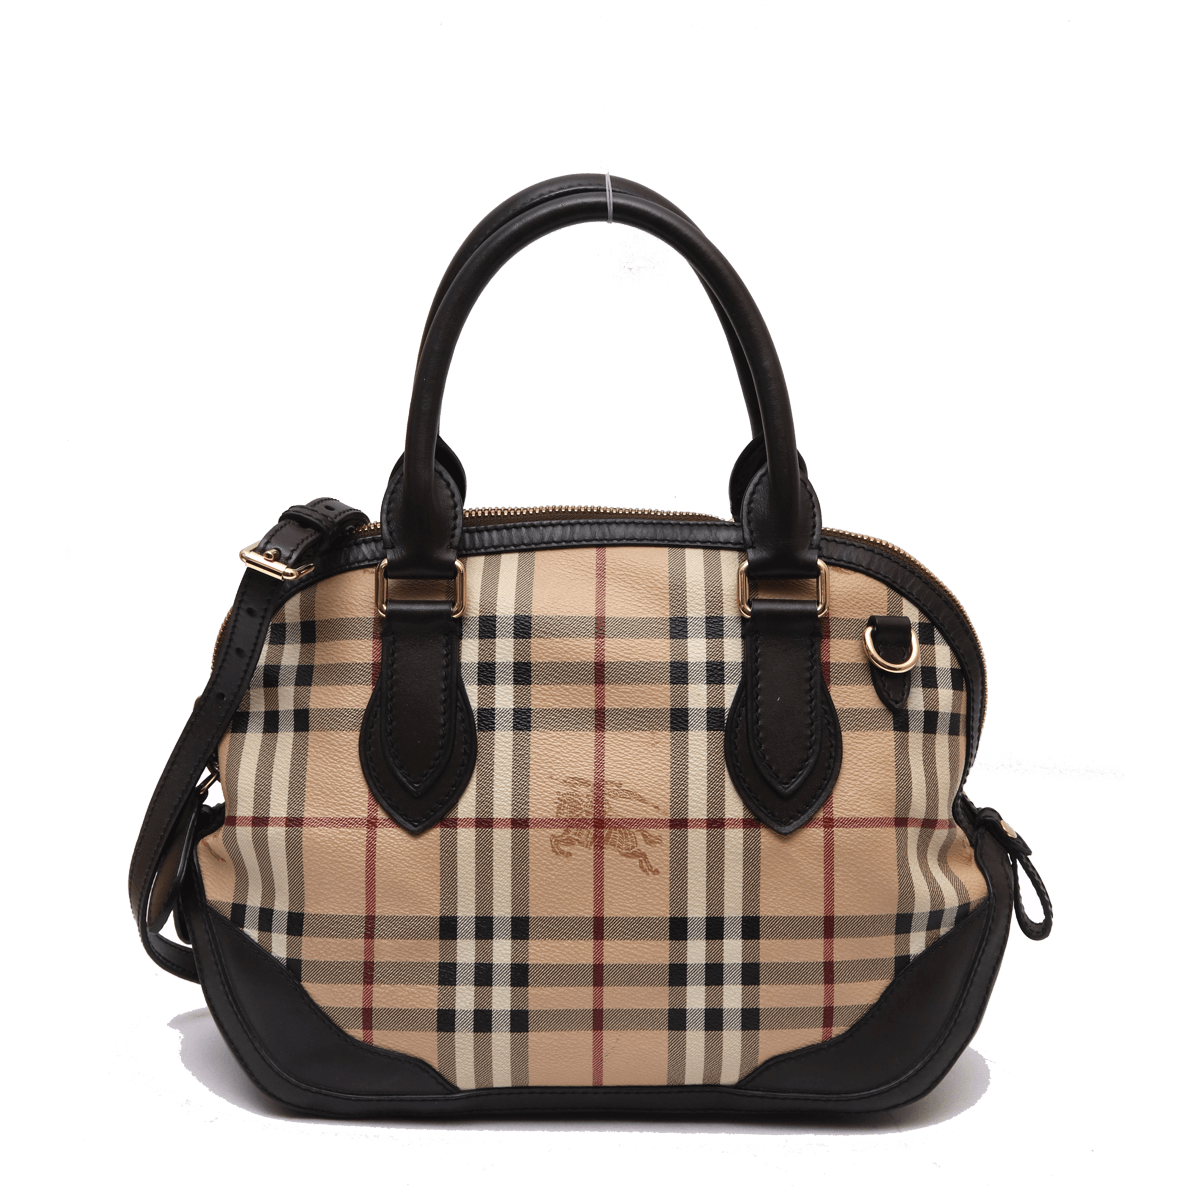 Burberry Pattern PNG Transparent Image